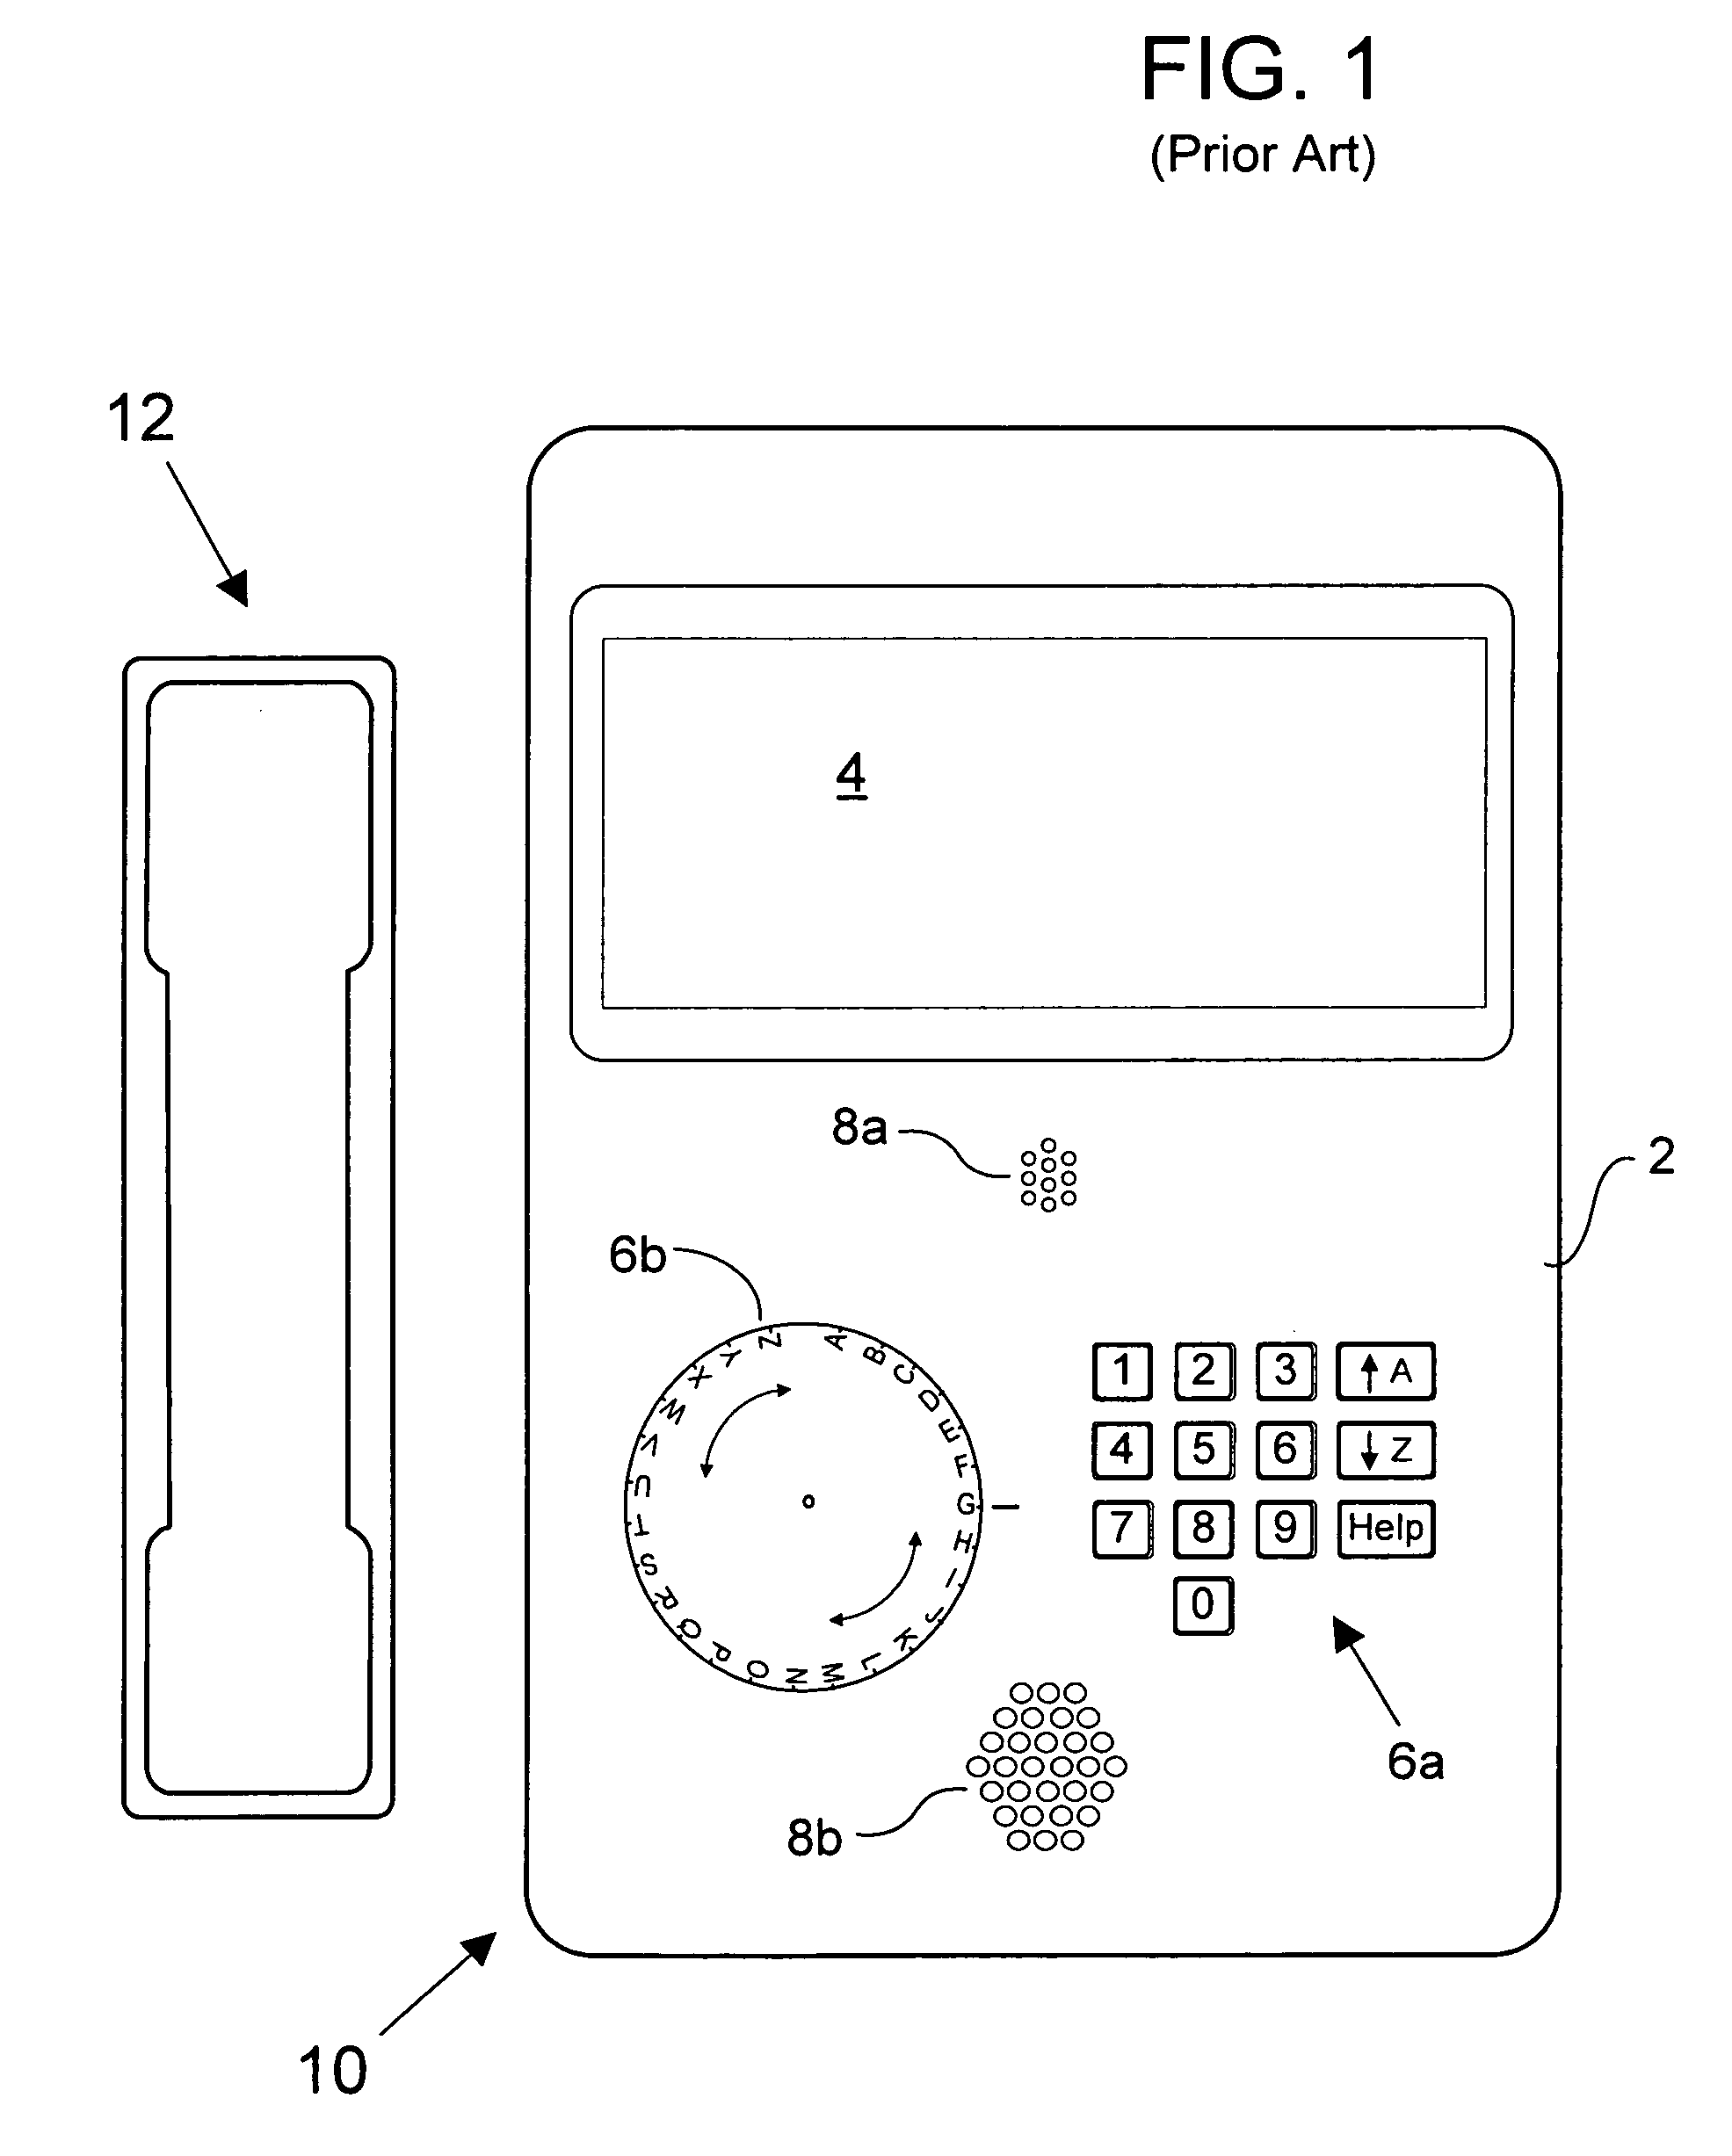 Directory display and configurable entry system